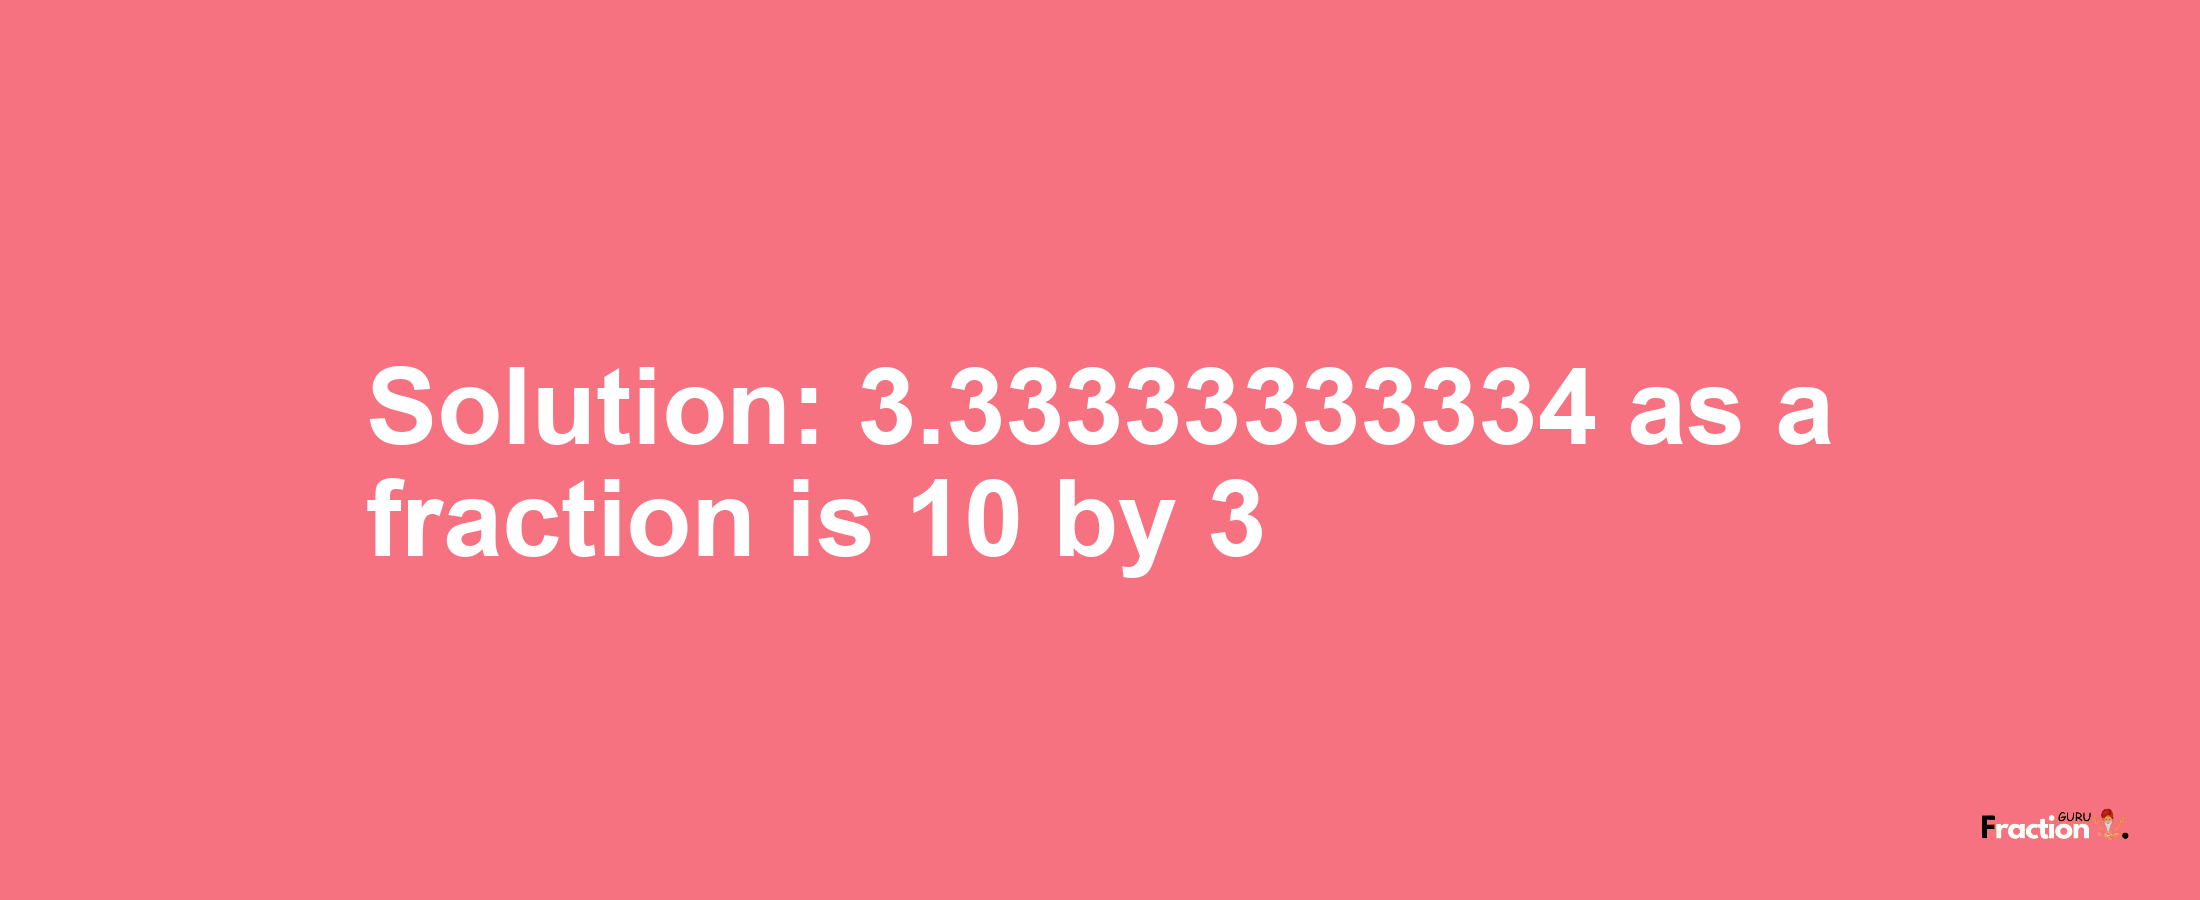 Solution:3.33333333334 as a fraction is 10/3